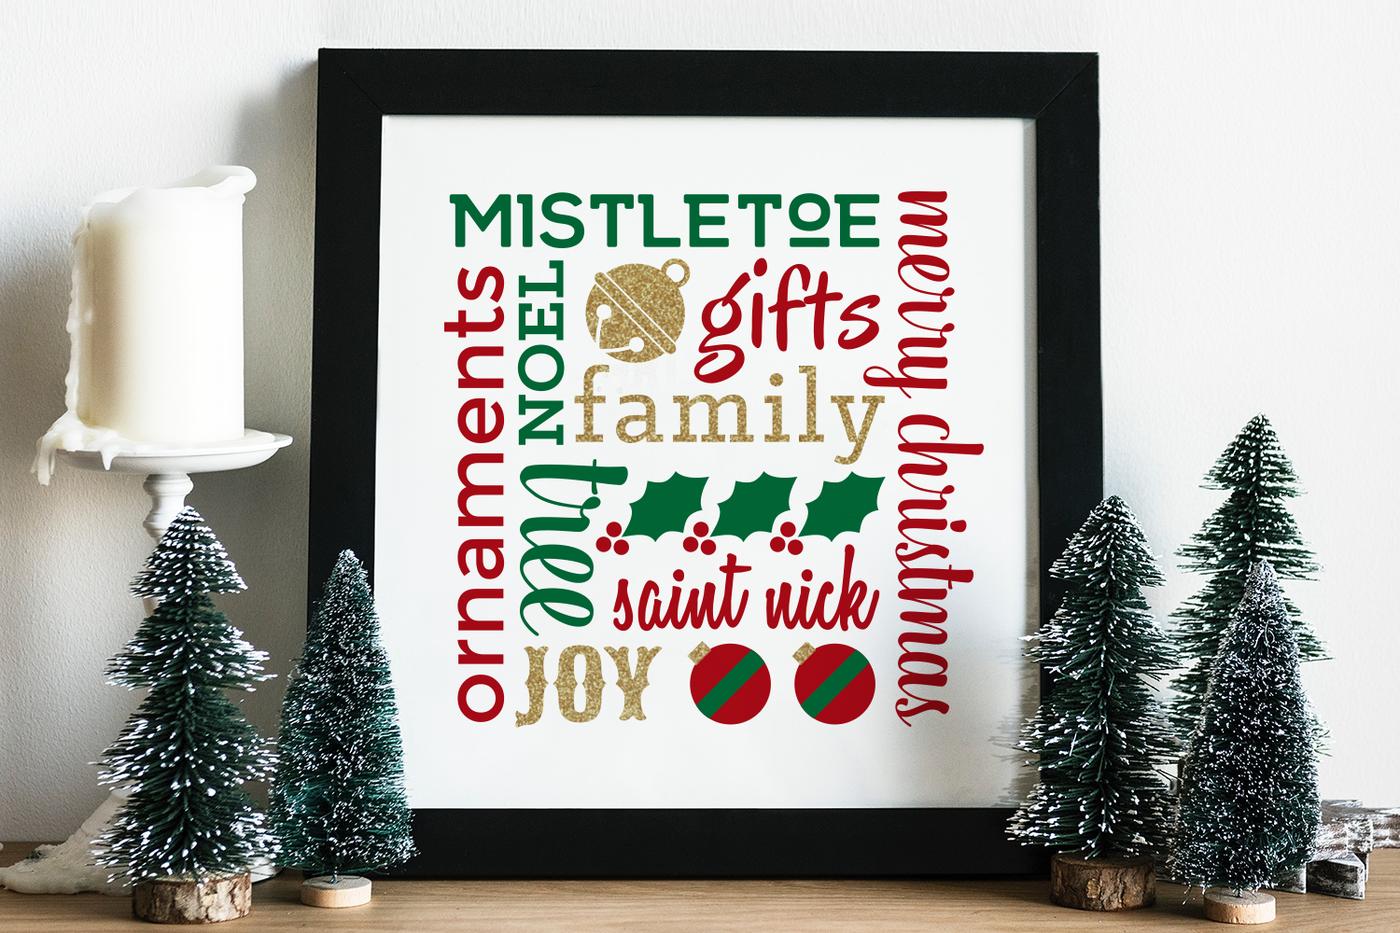 A square framed poster on a table with mini Christmas trees and a candle near it. The poster has various Christmas words and symbols set on a square in red, green and gold on a white background.